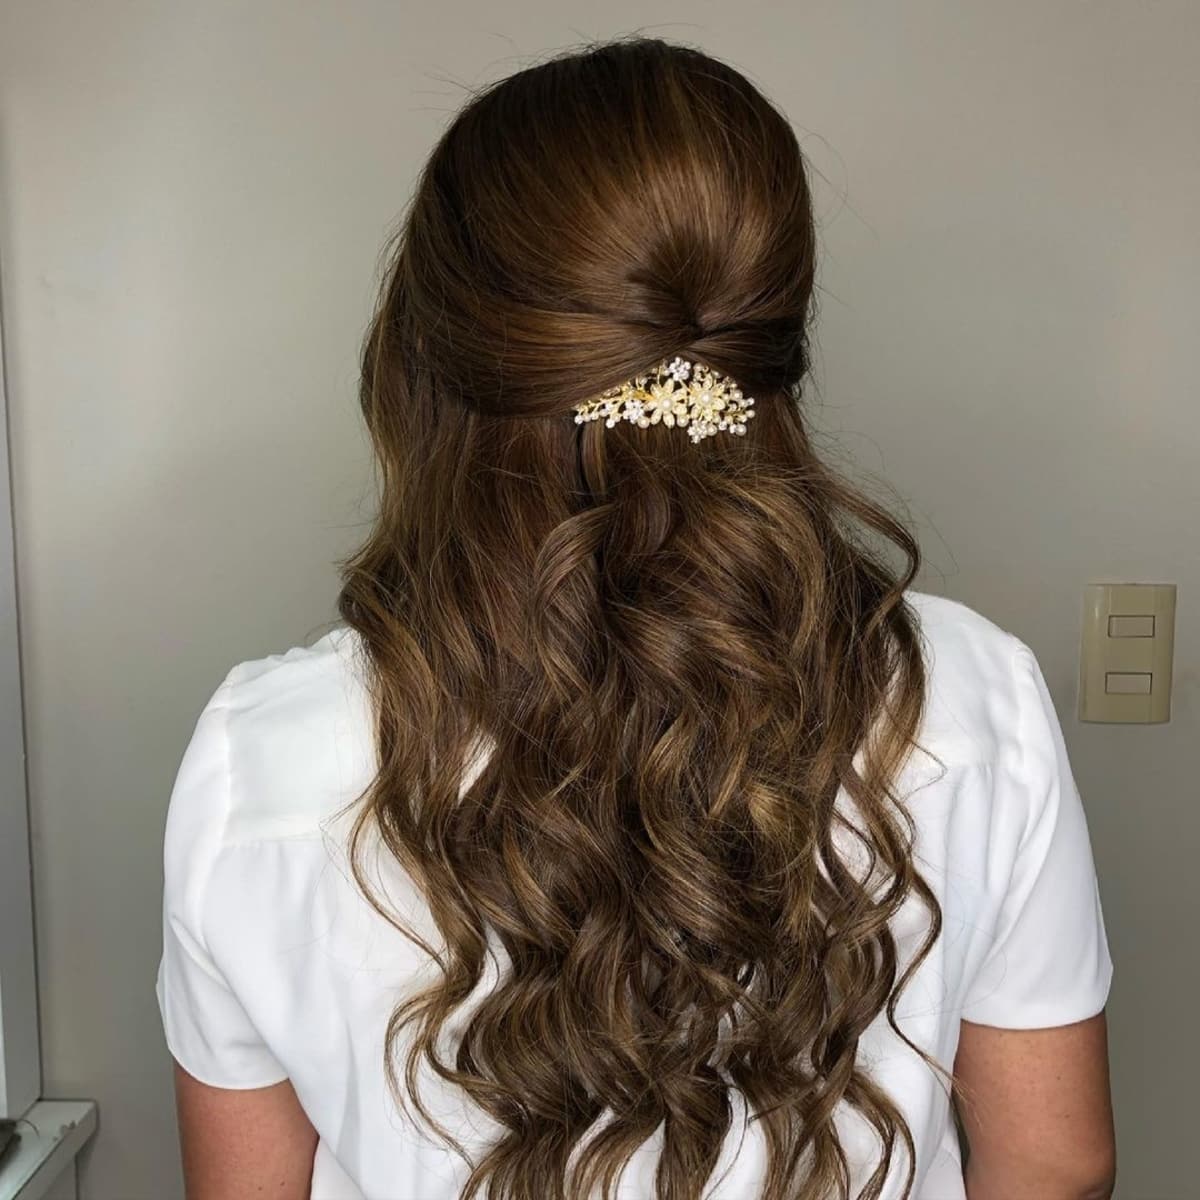 25 Professional Hairstyles For Every Type of Workplace